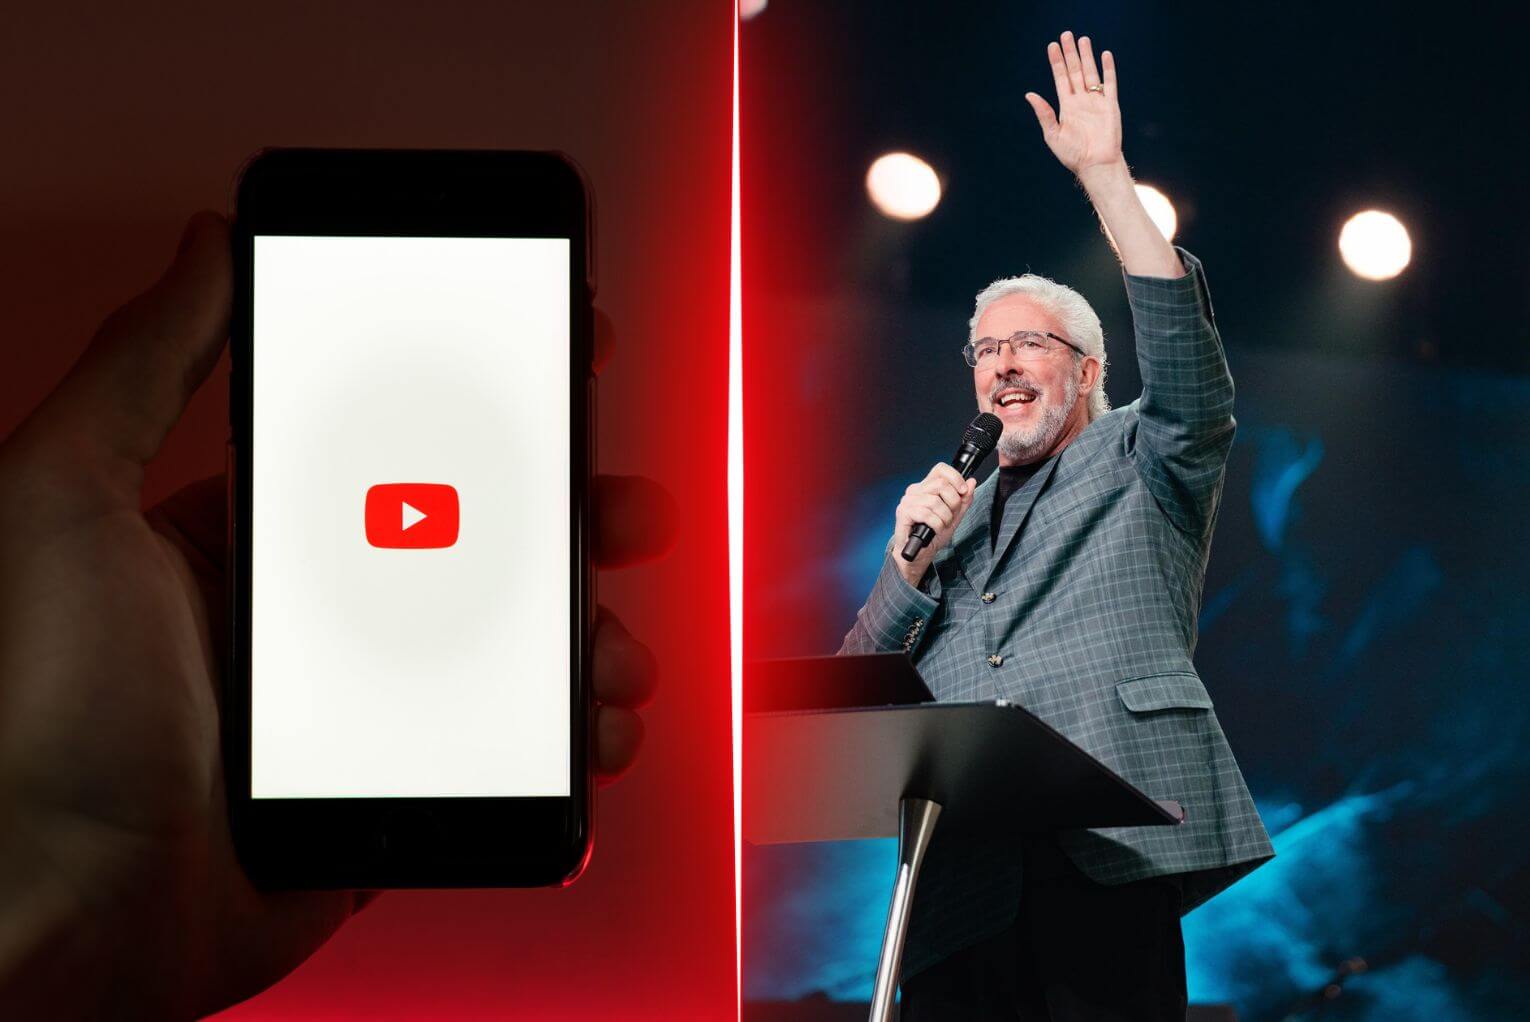 Perry Stone Warning: The Dangerous Rise of YouTube Prophets